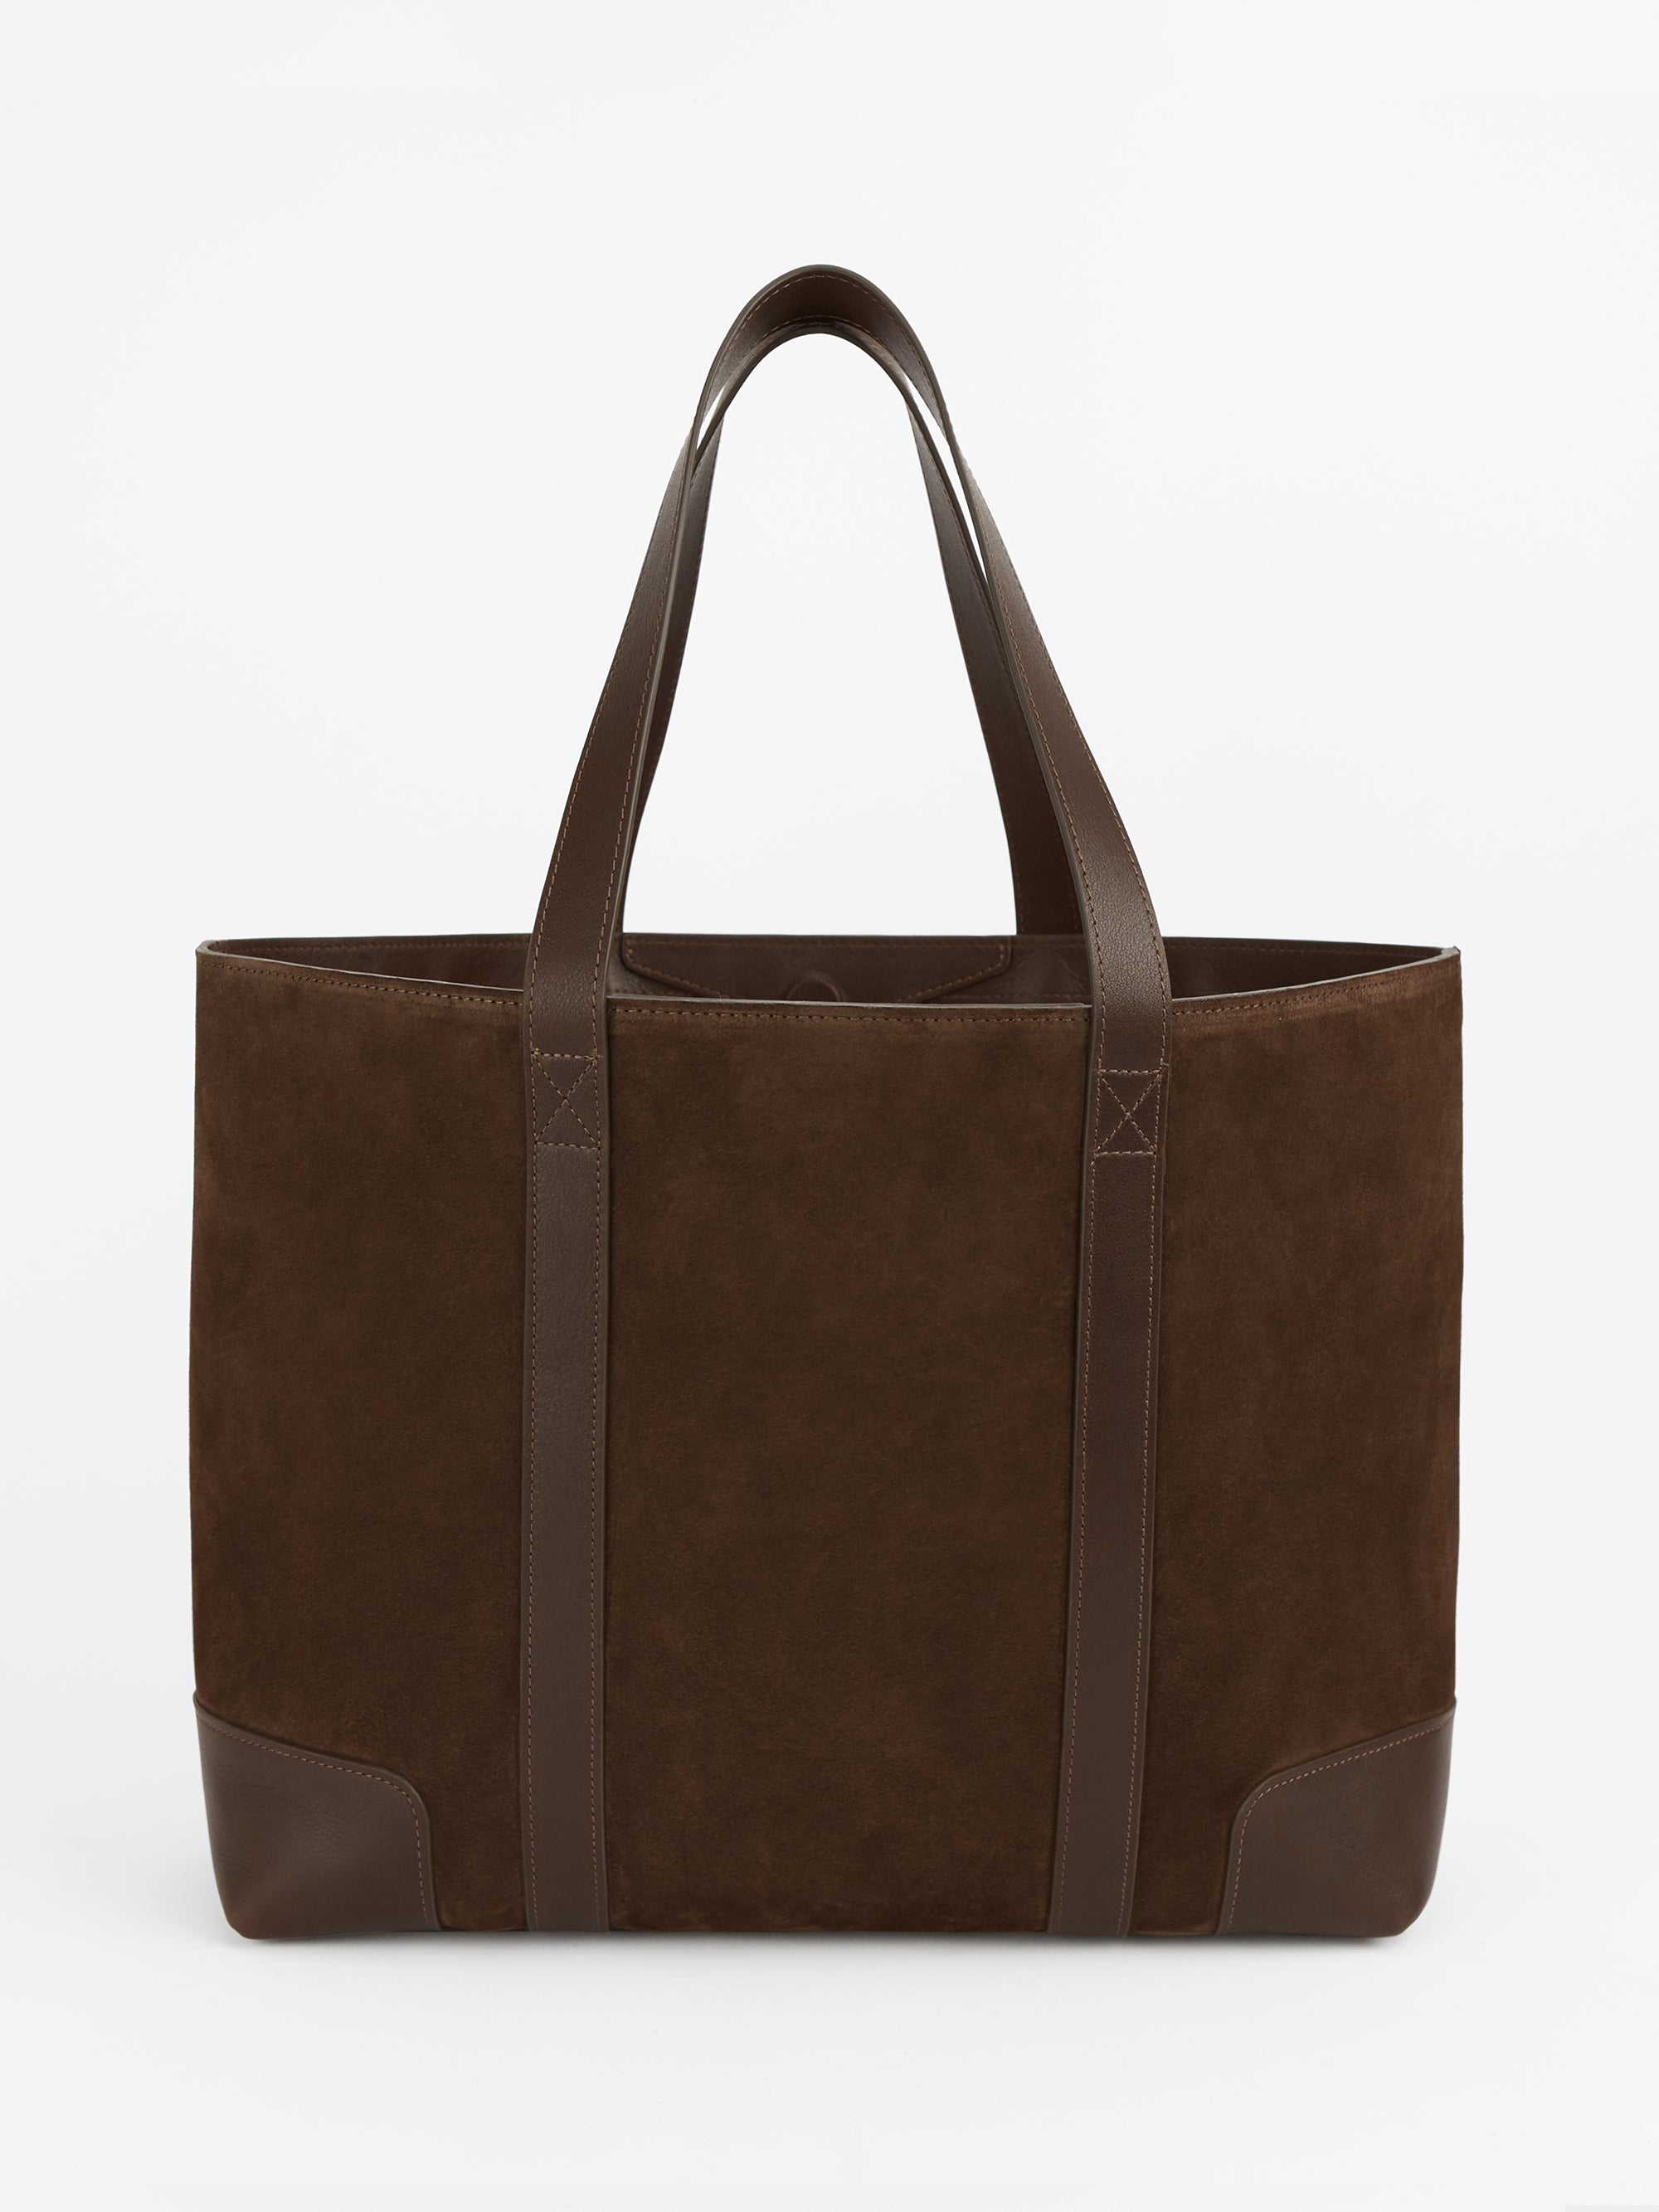 Letter 'S' The Suede Tote Bag, Chocolate, Red lining